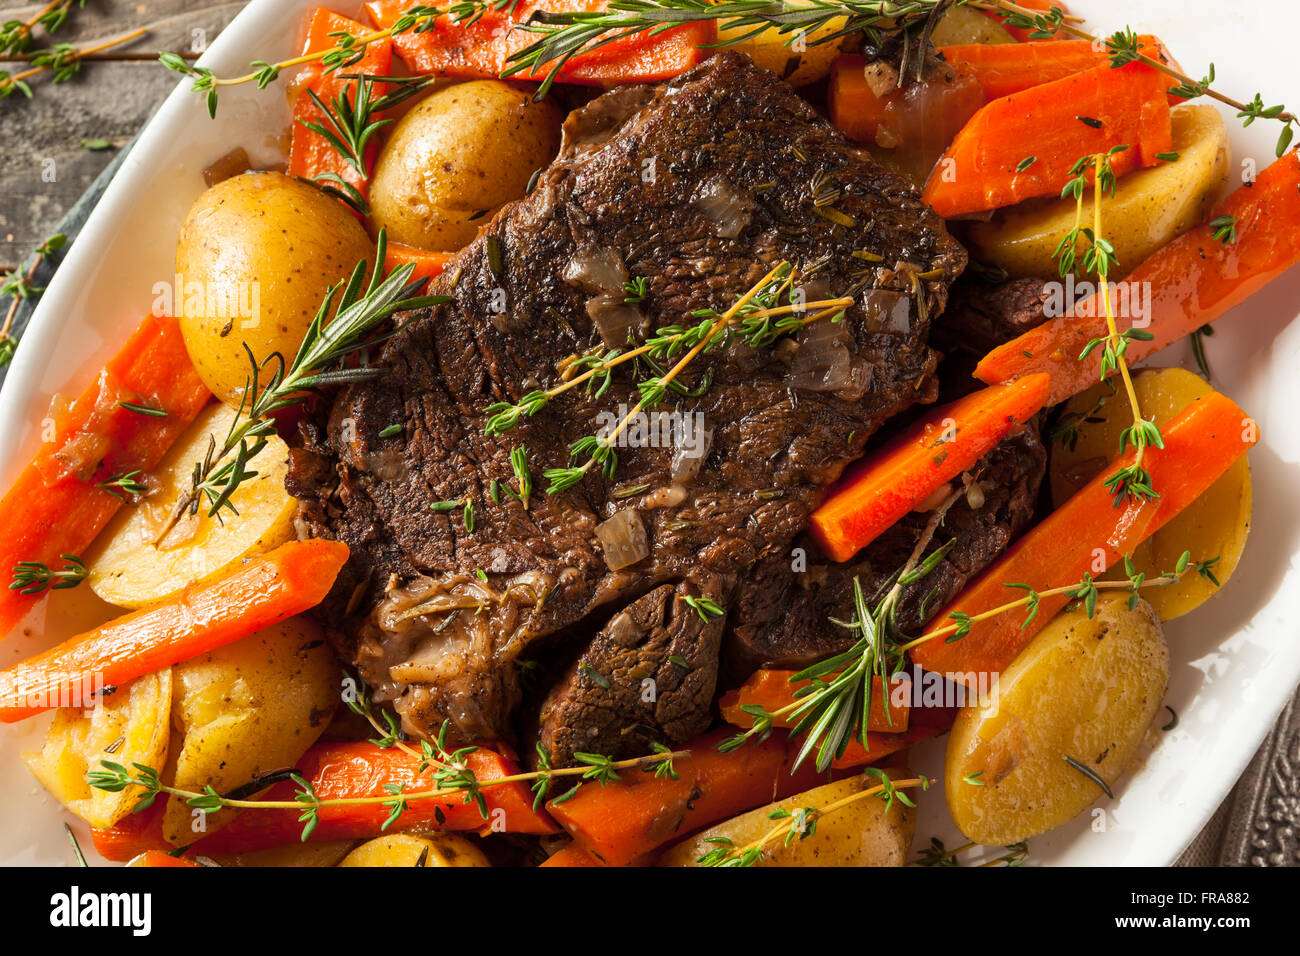 Homemade Slow Cooker Pot Roast with Carrots and Potatoes Stock Photo